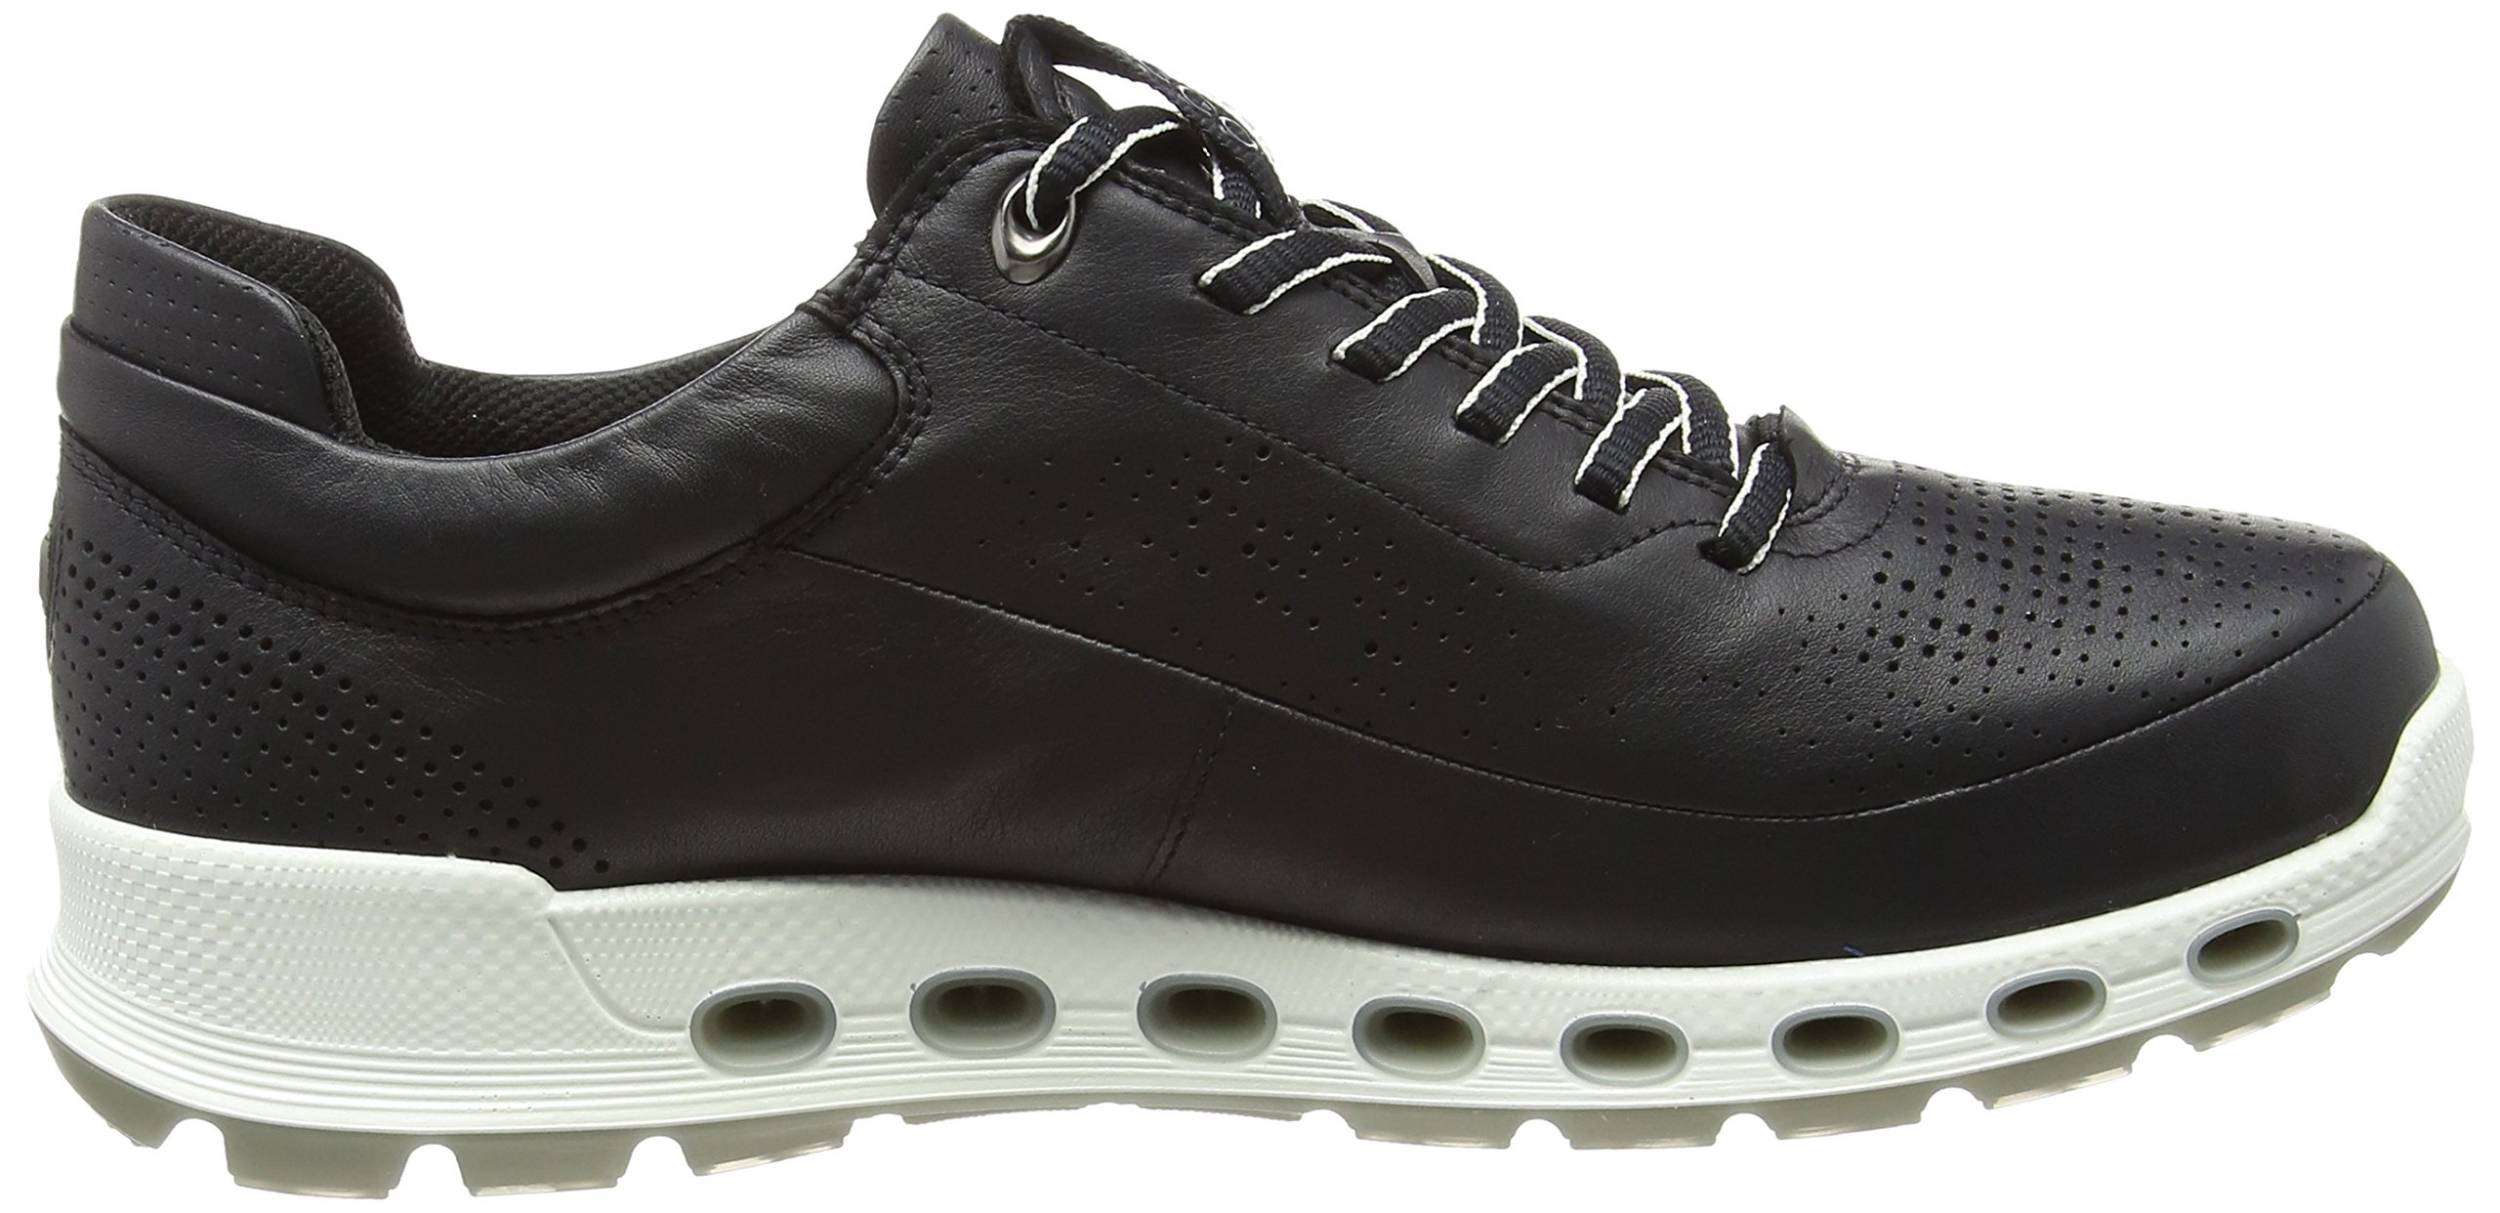 20+ Ecco sneakers: Save up to 51% | RunRepeat